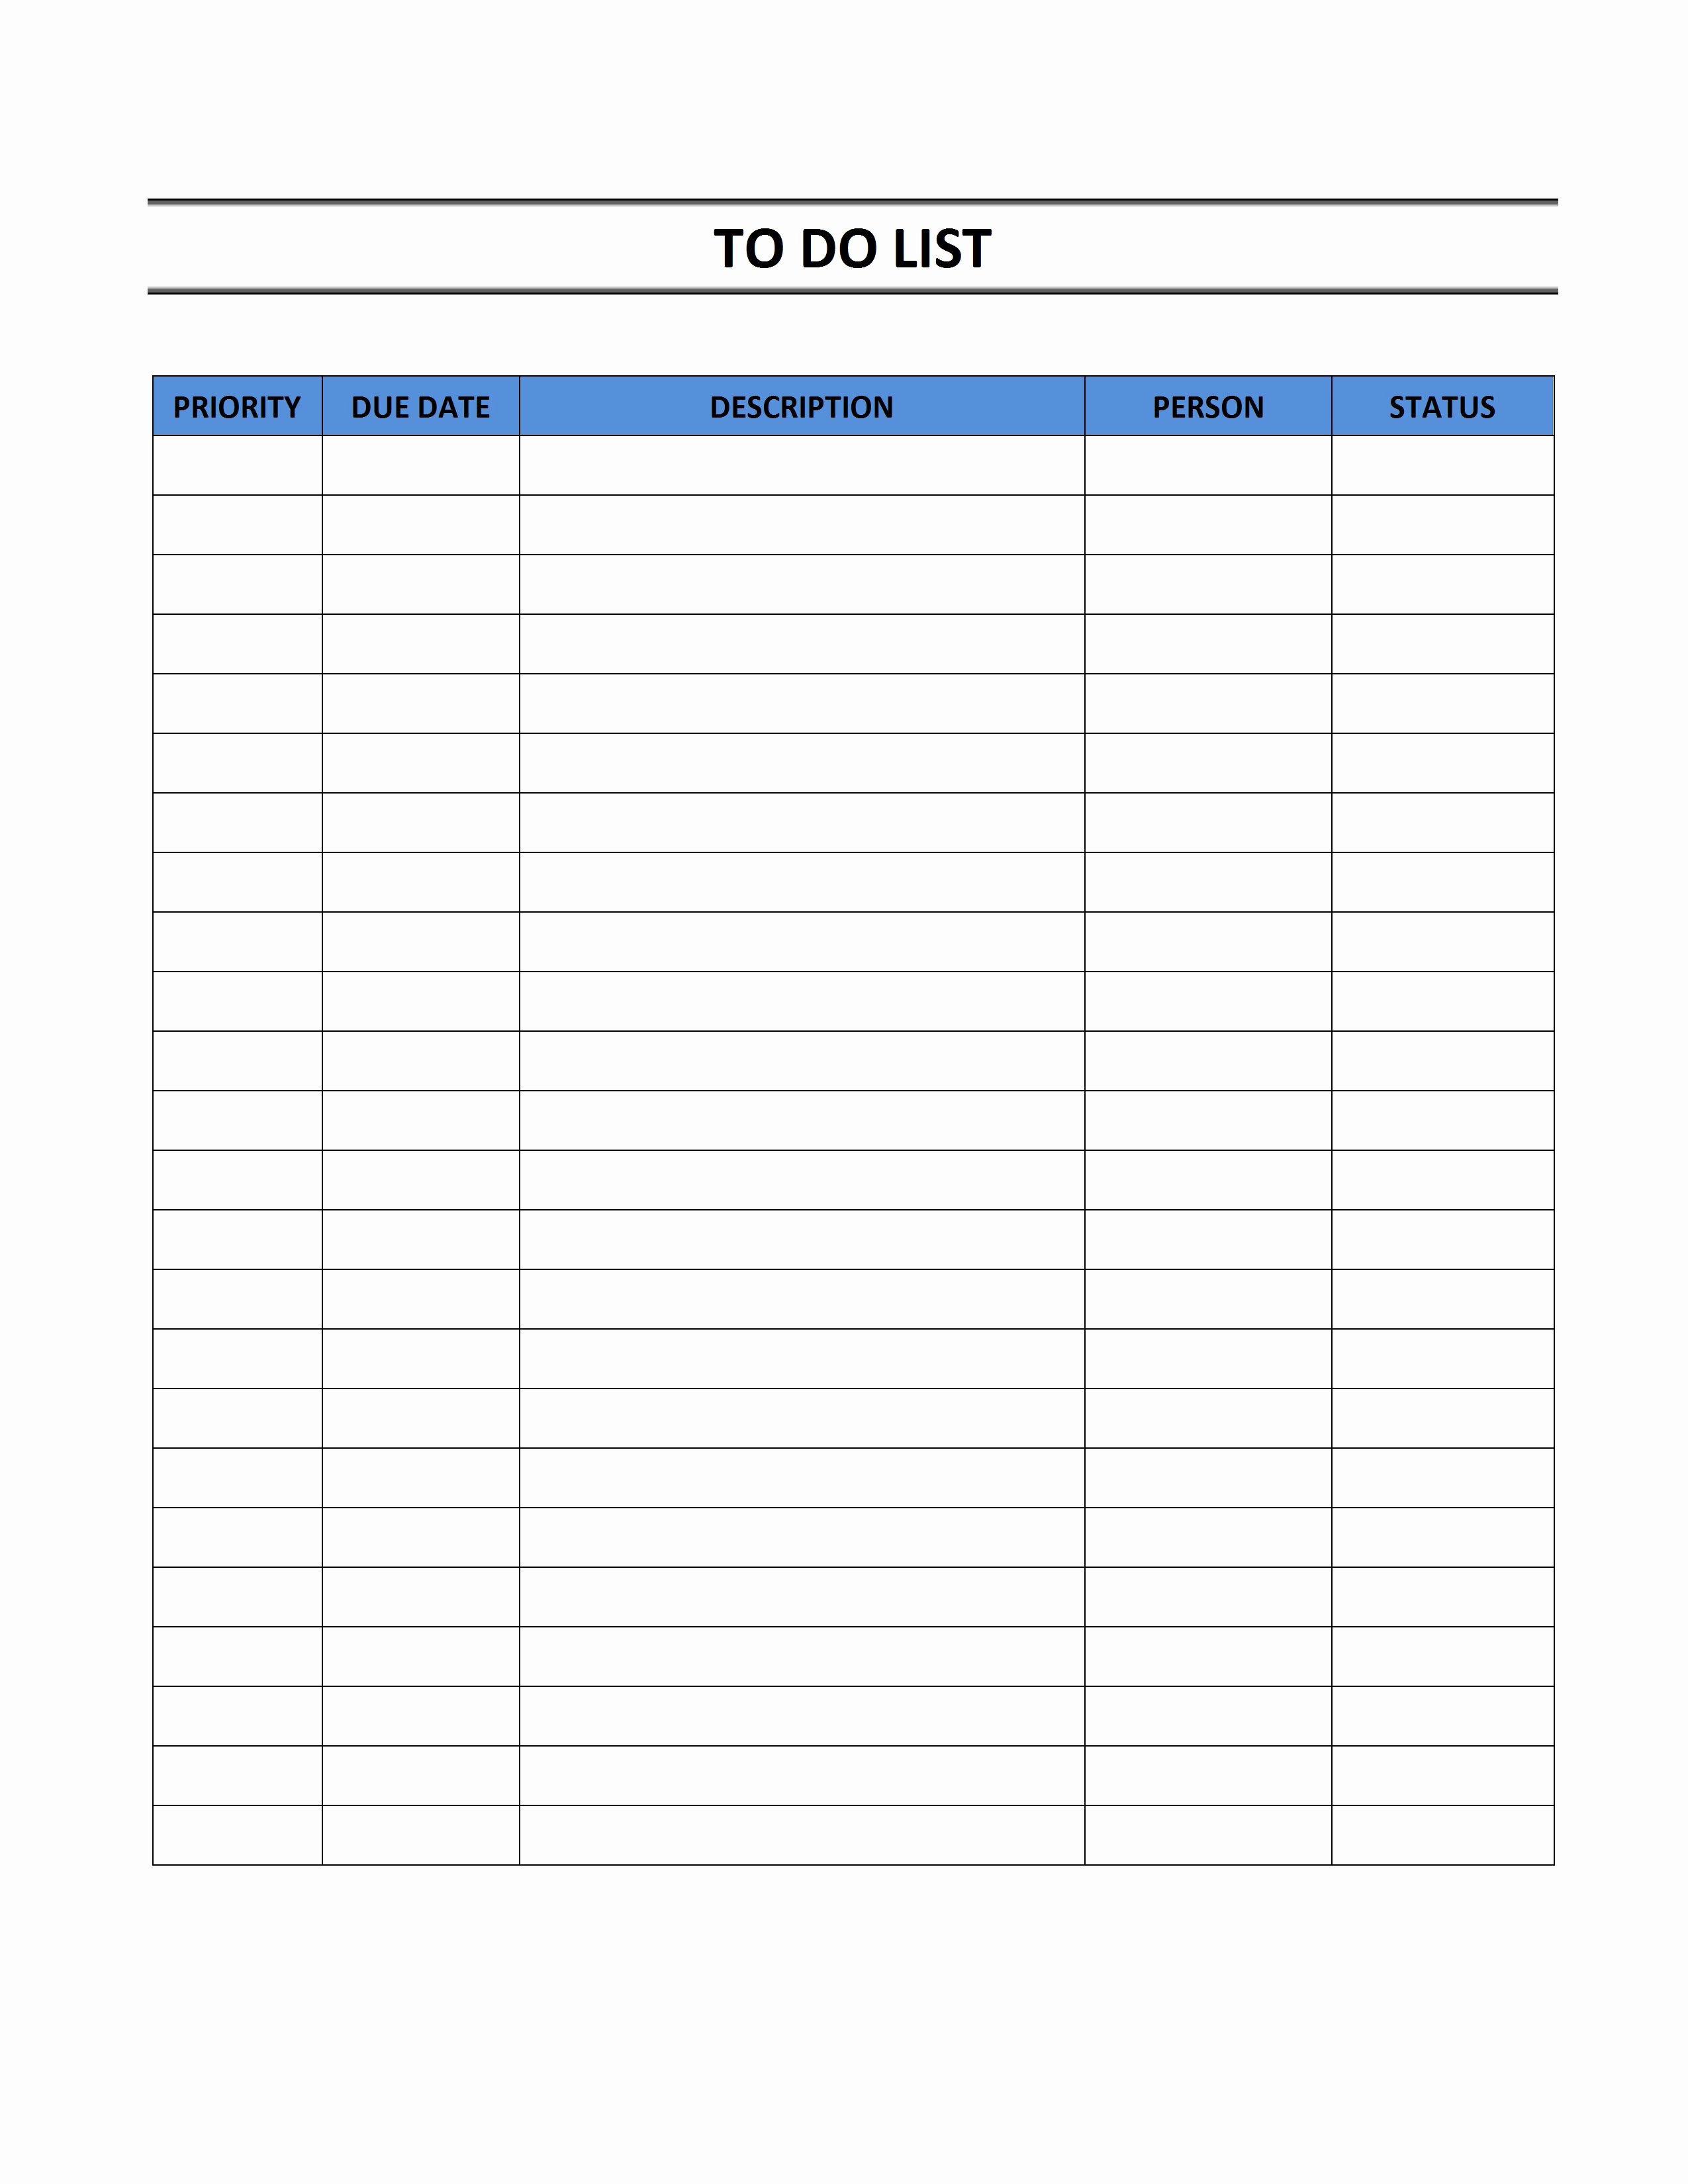 To Do List Template Free Best Of to Do List